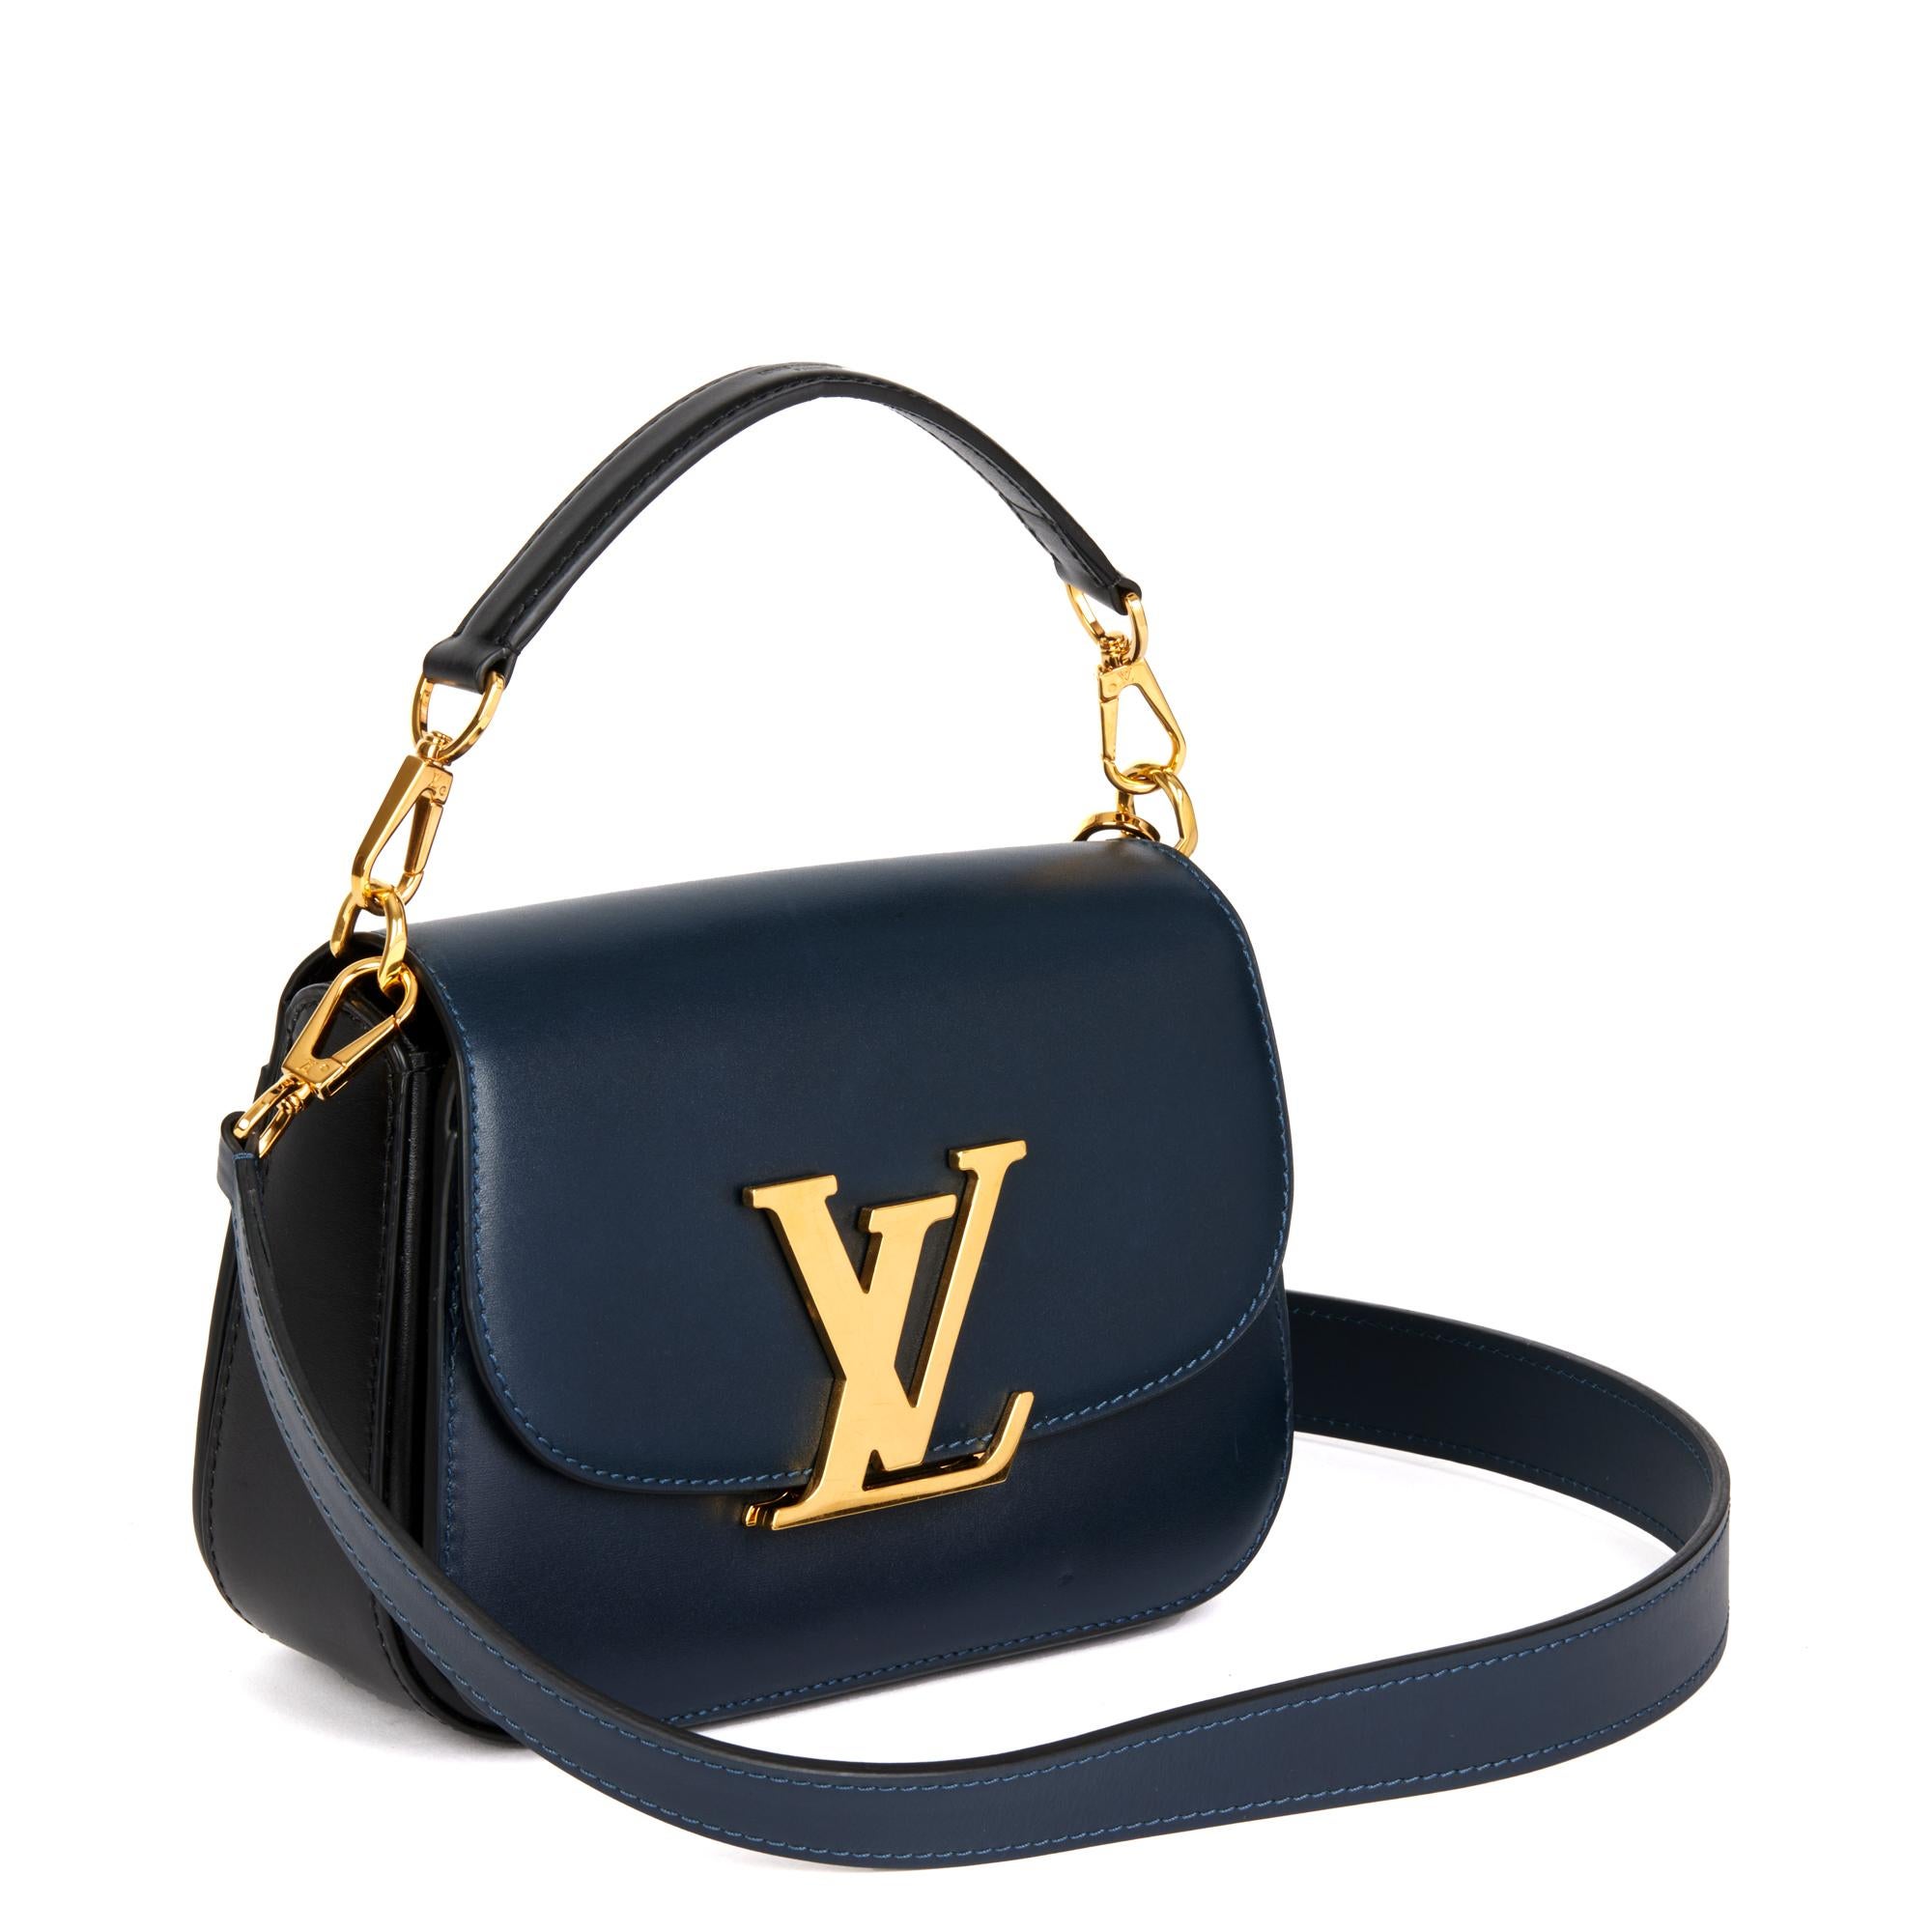 LOUIS VUITTON
Black & Navy Box Calf Leather Vivienne

Xupes Reference: CB586
Serial Number: TR 0163
Age (Circa): 2013
Accompanied By: Louis Vuitton Dust Bag, Shoulder Strap, Care Booklet
Authenticity Details: Date Stamp (Made in France)
Gender: